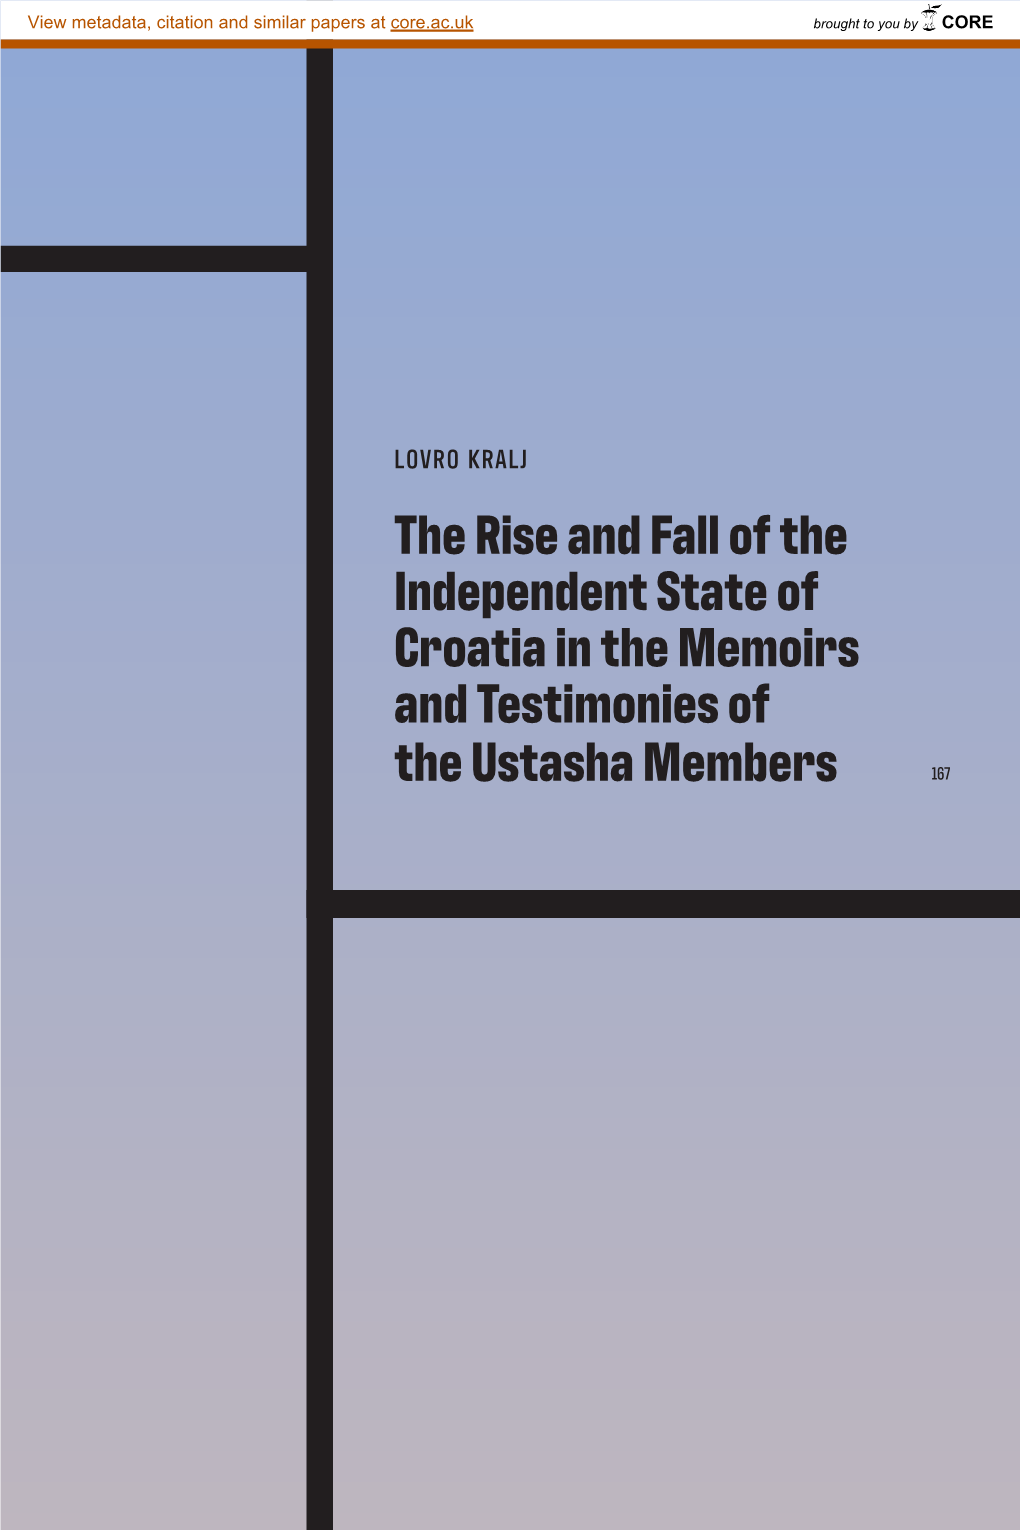 The Rise and Fall of the Independent State of Croatia in the Memoirs and Testimonies Of